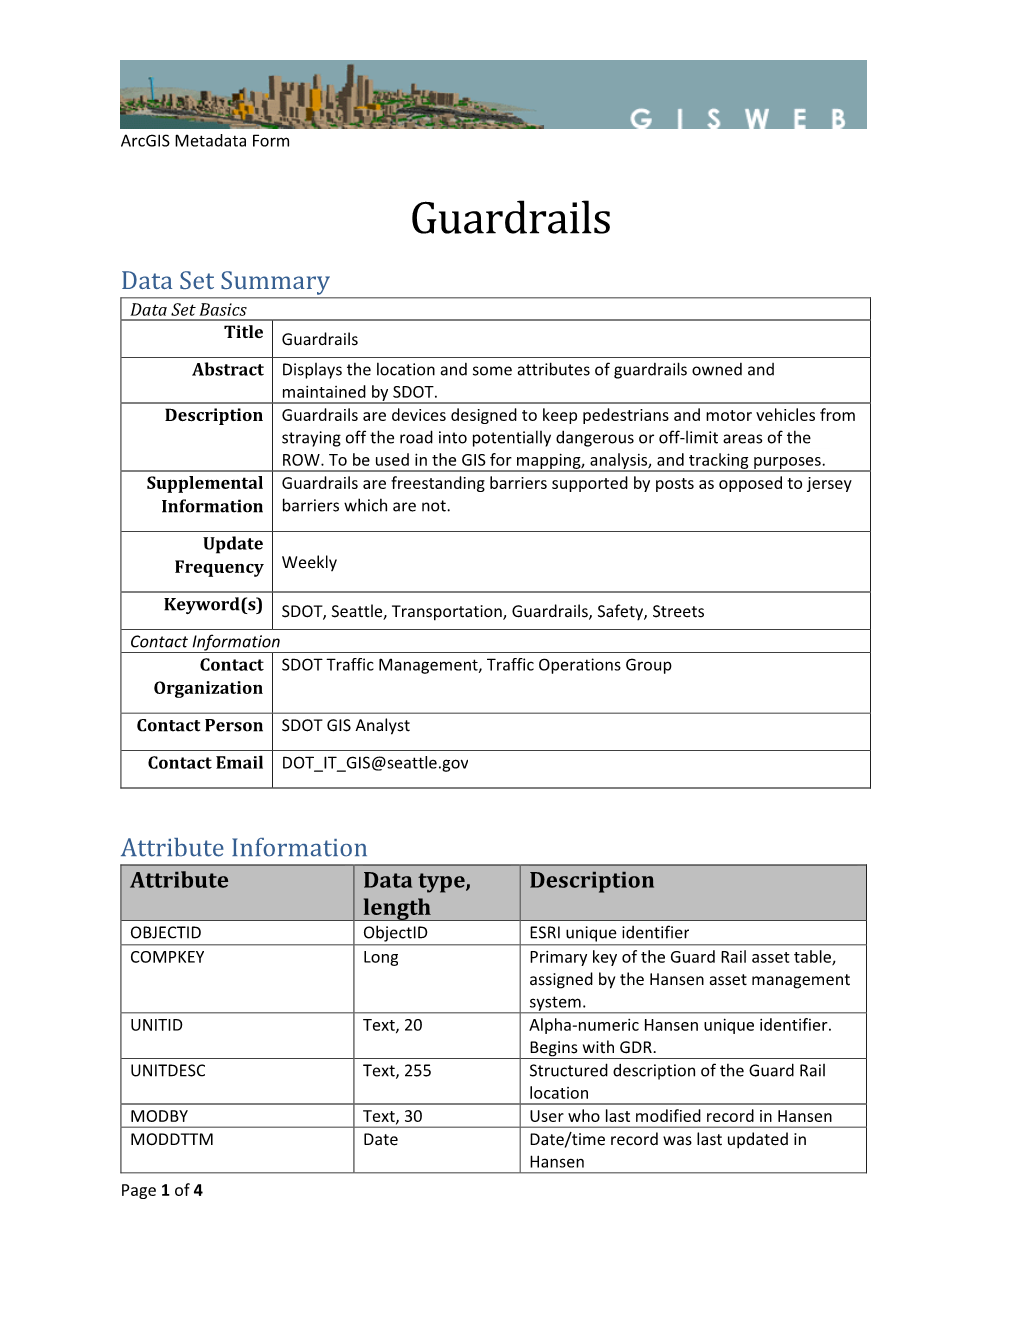 Guardrails Data Set Summary Data Set Basics Title Guardrails Abstract Displays the Location and Some Attributes of Guardrails Owned and Maintained by SDOT